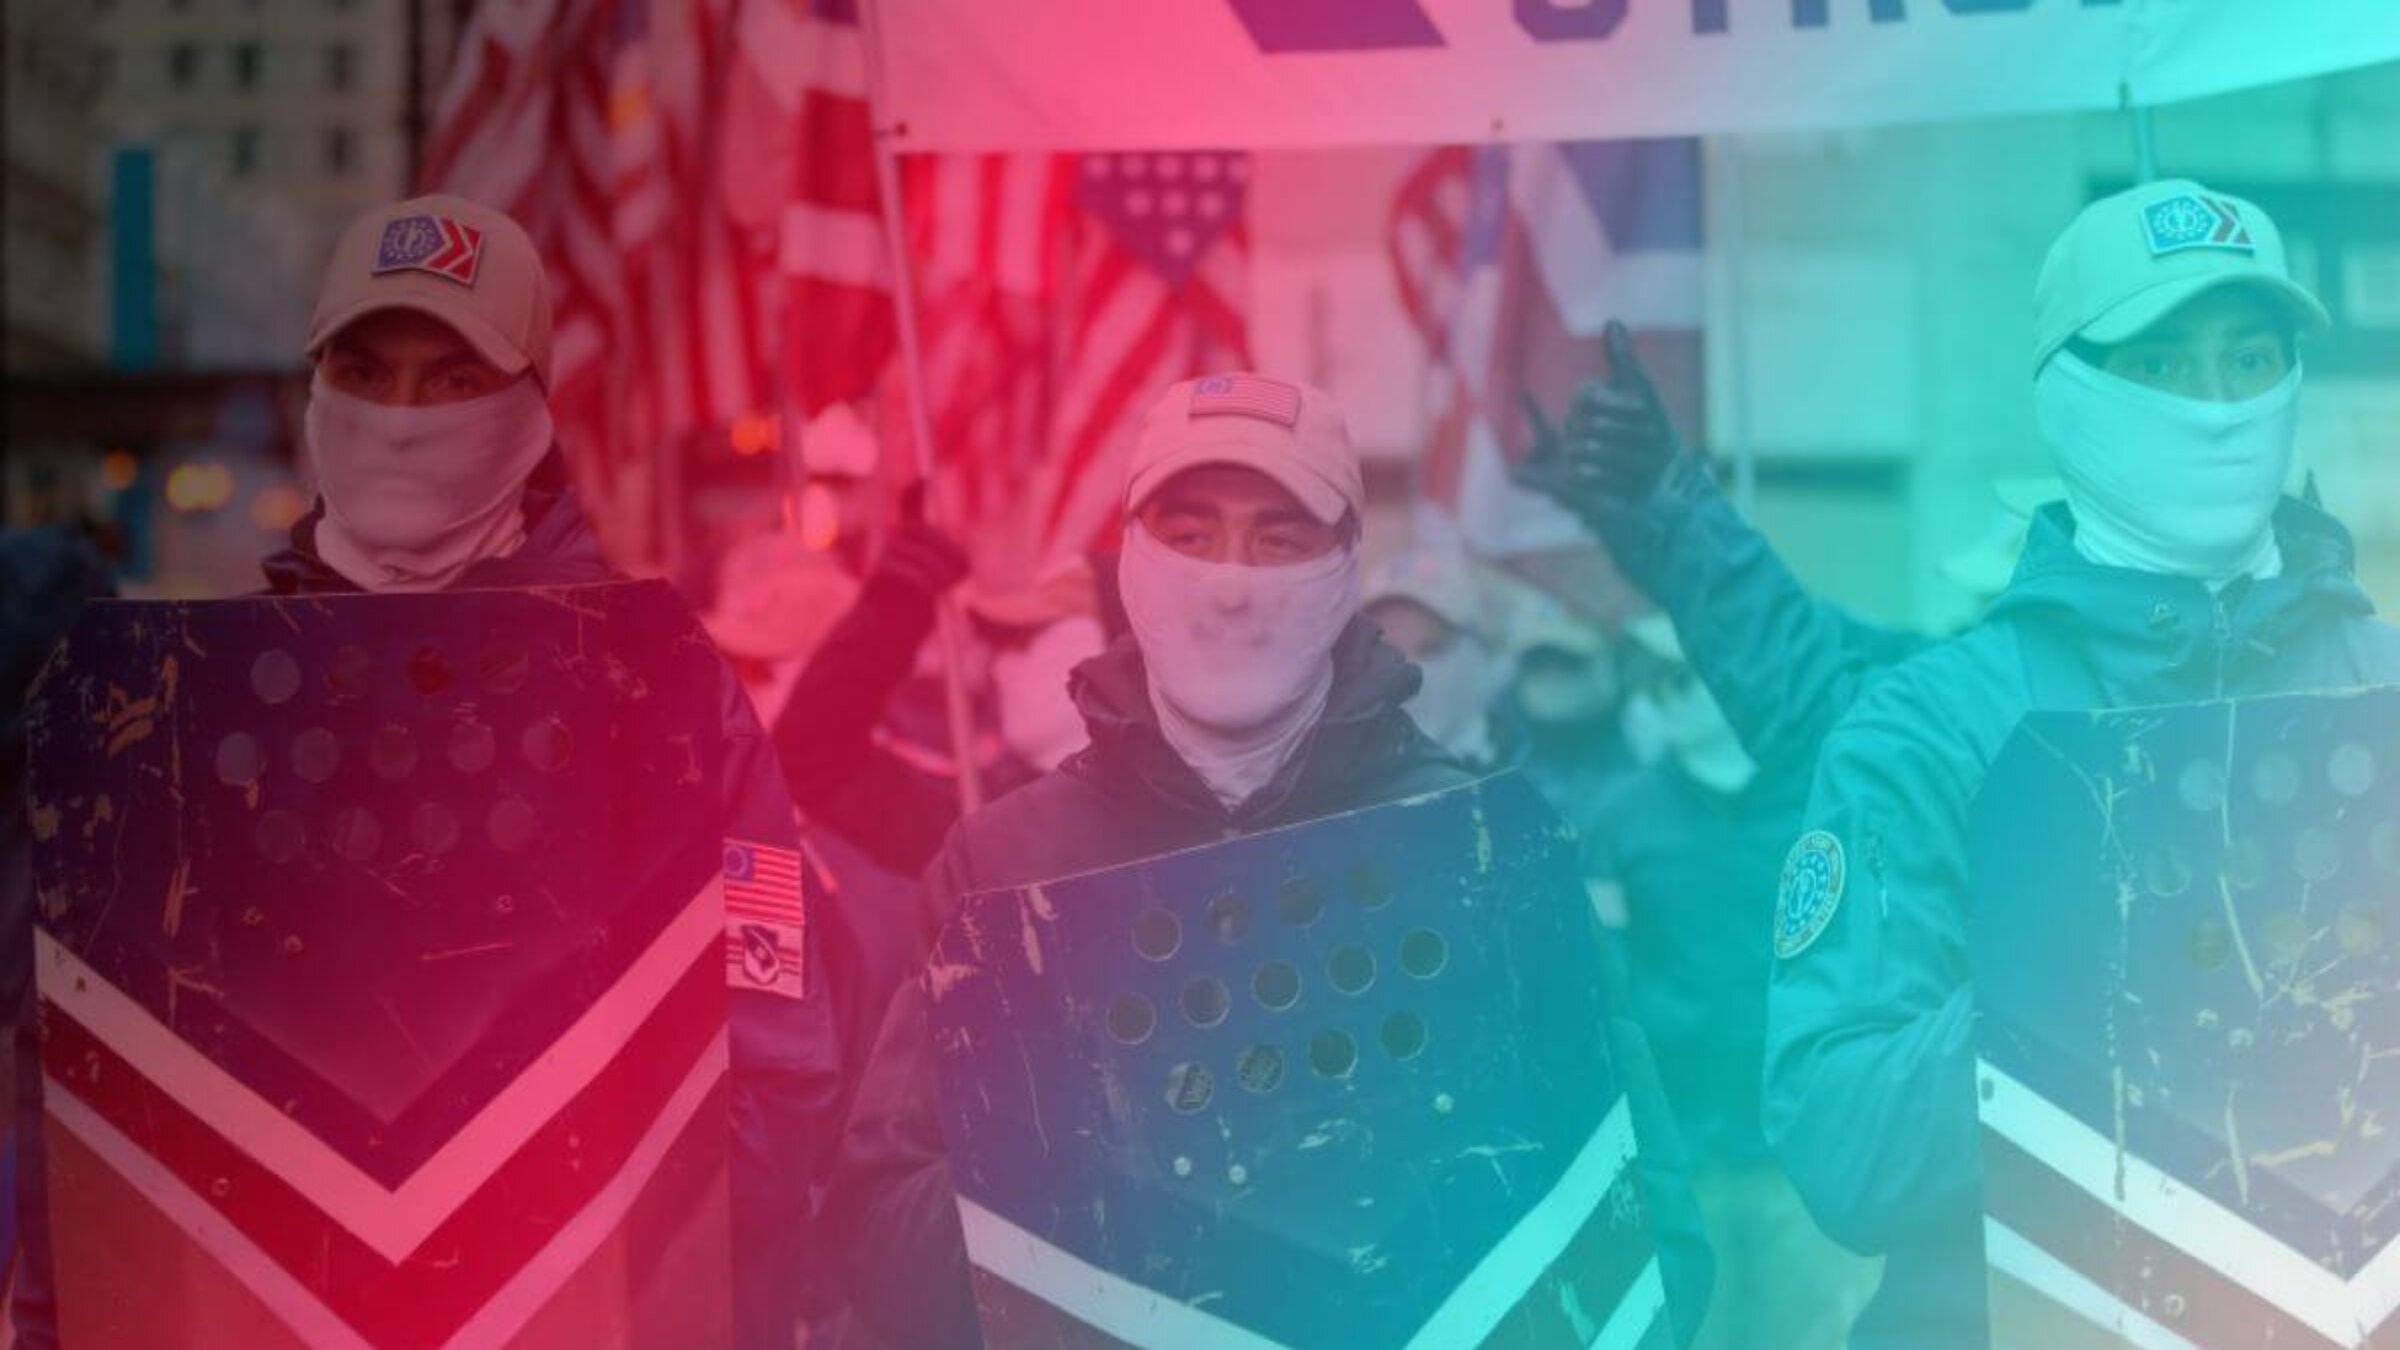 The white nationalist group Patriot Front attends the March For Life on January 8, 2022 in Chicago, Illinois. Libs of TikTok has directed them to target a Pride event in Coeur d'Alene, Idaho. 